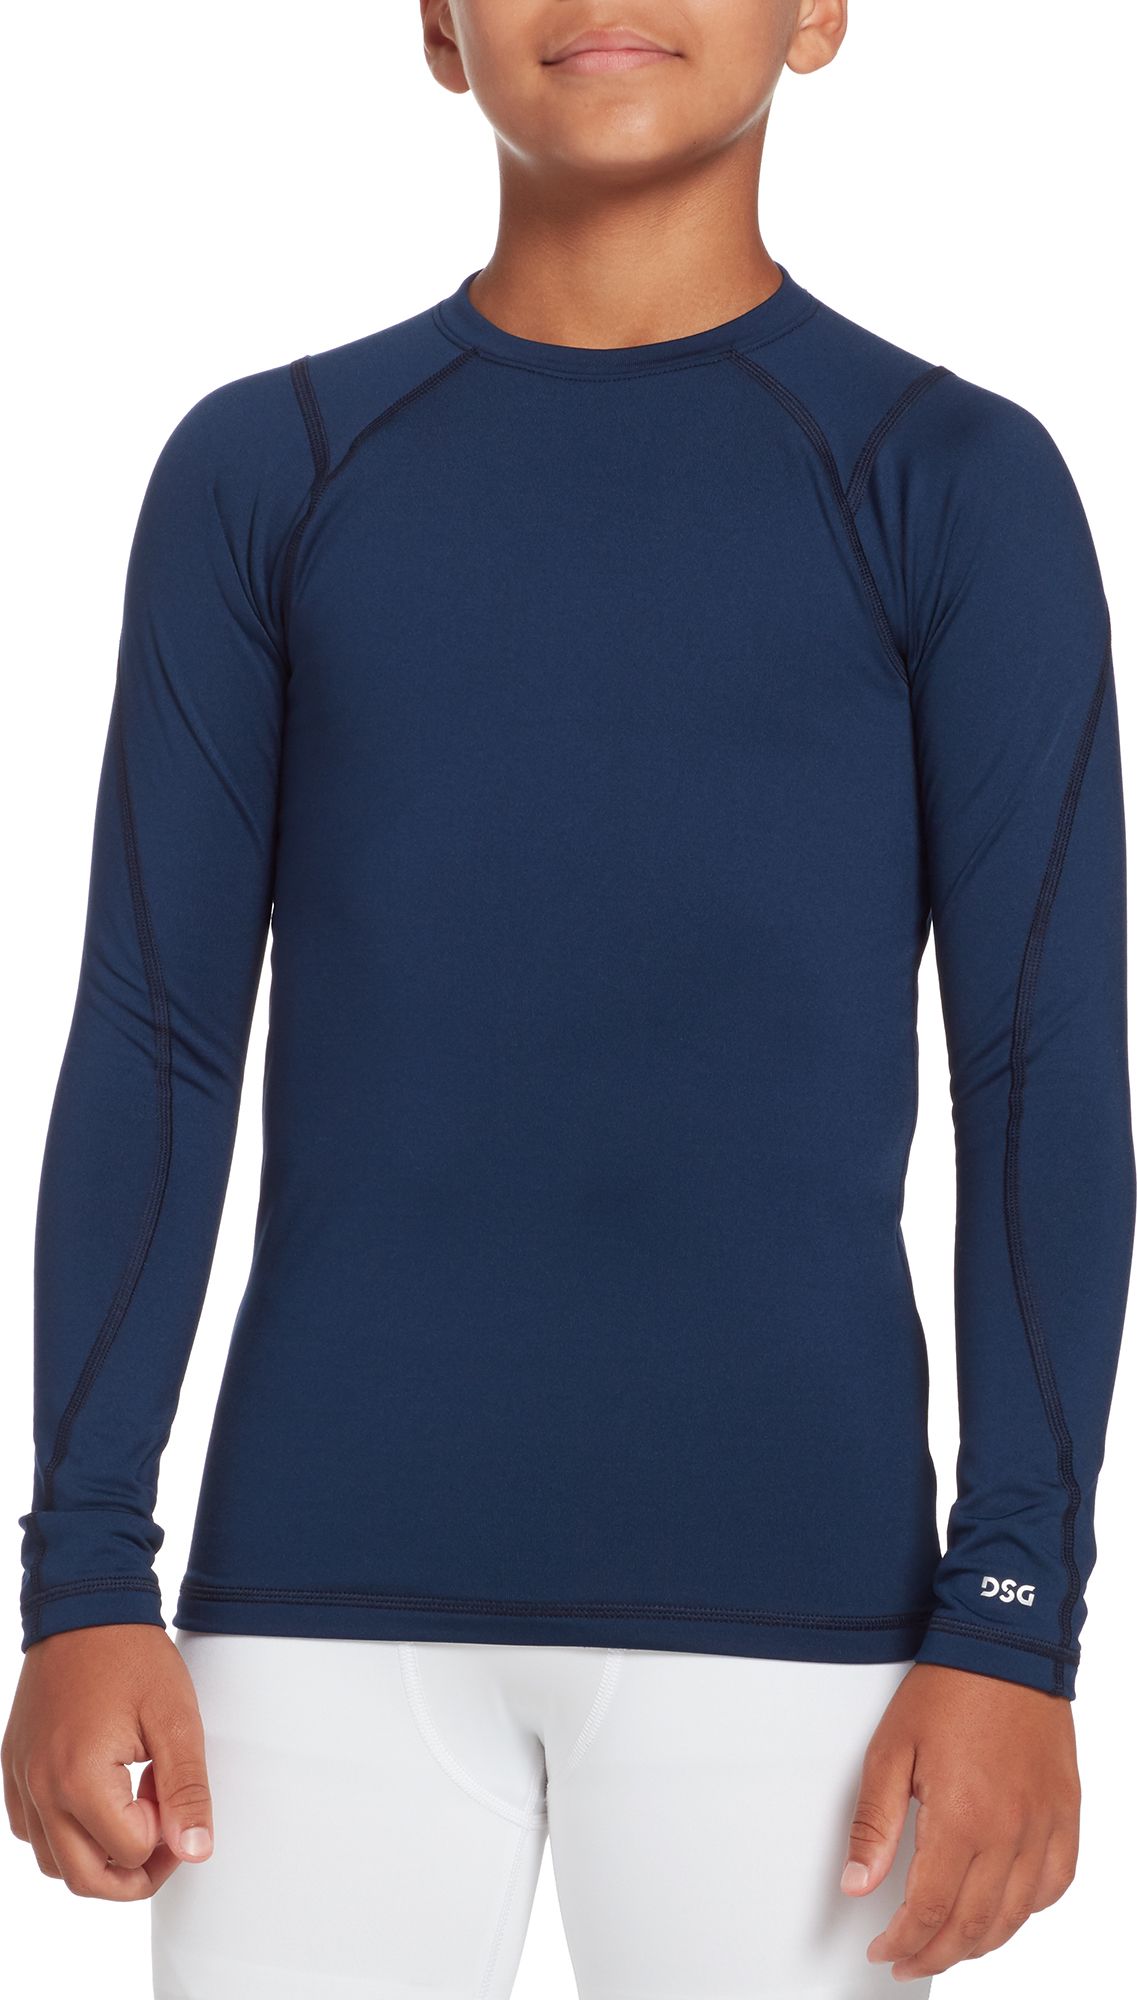 youth coldgear compression shirts